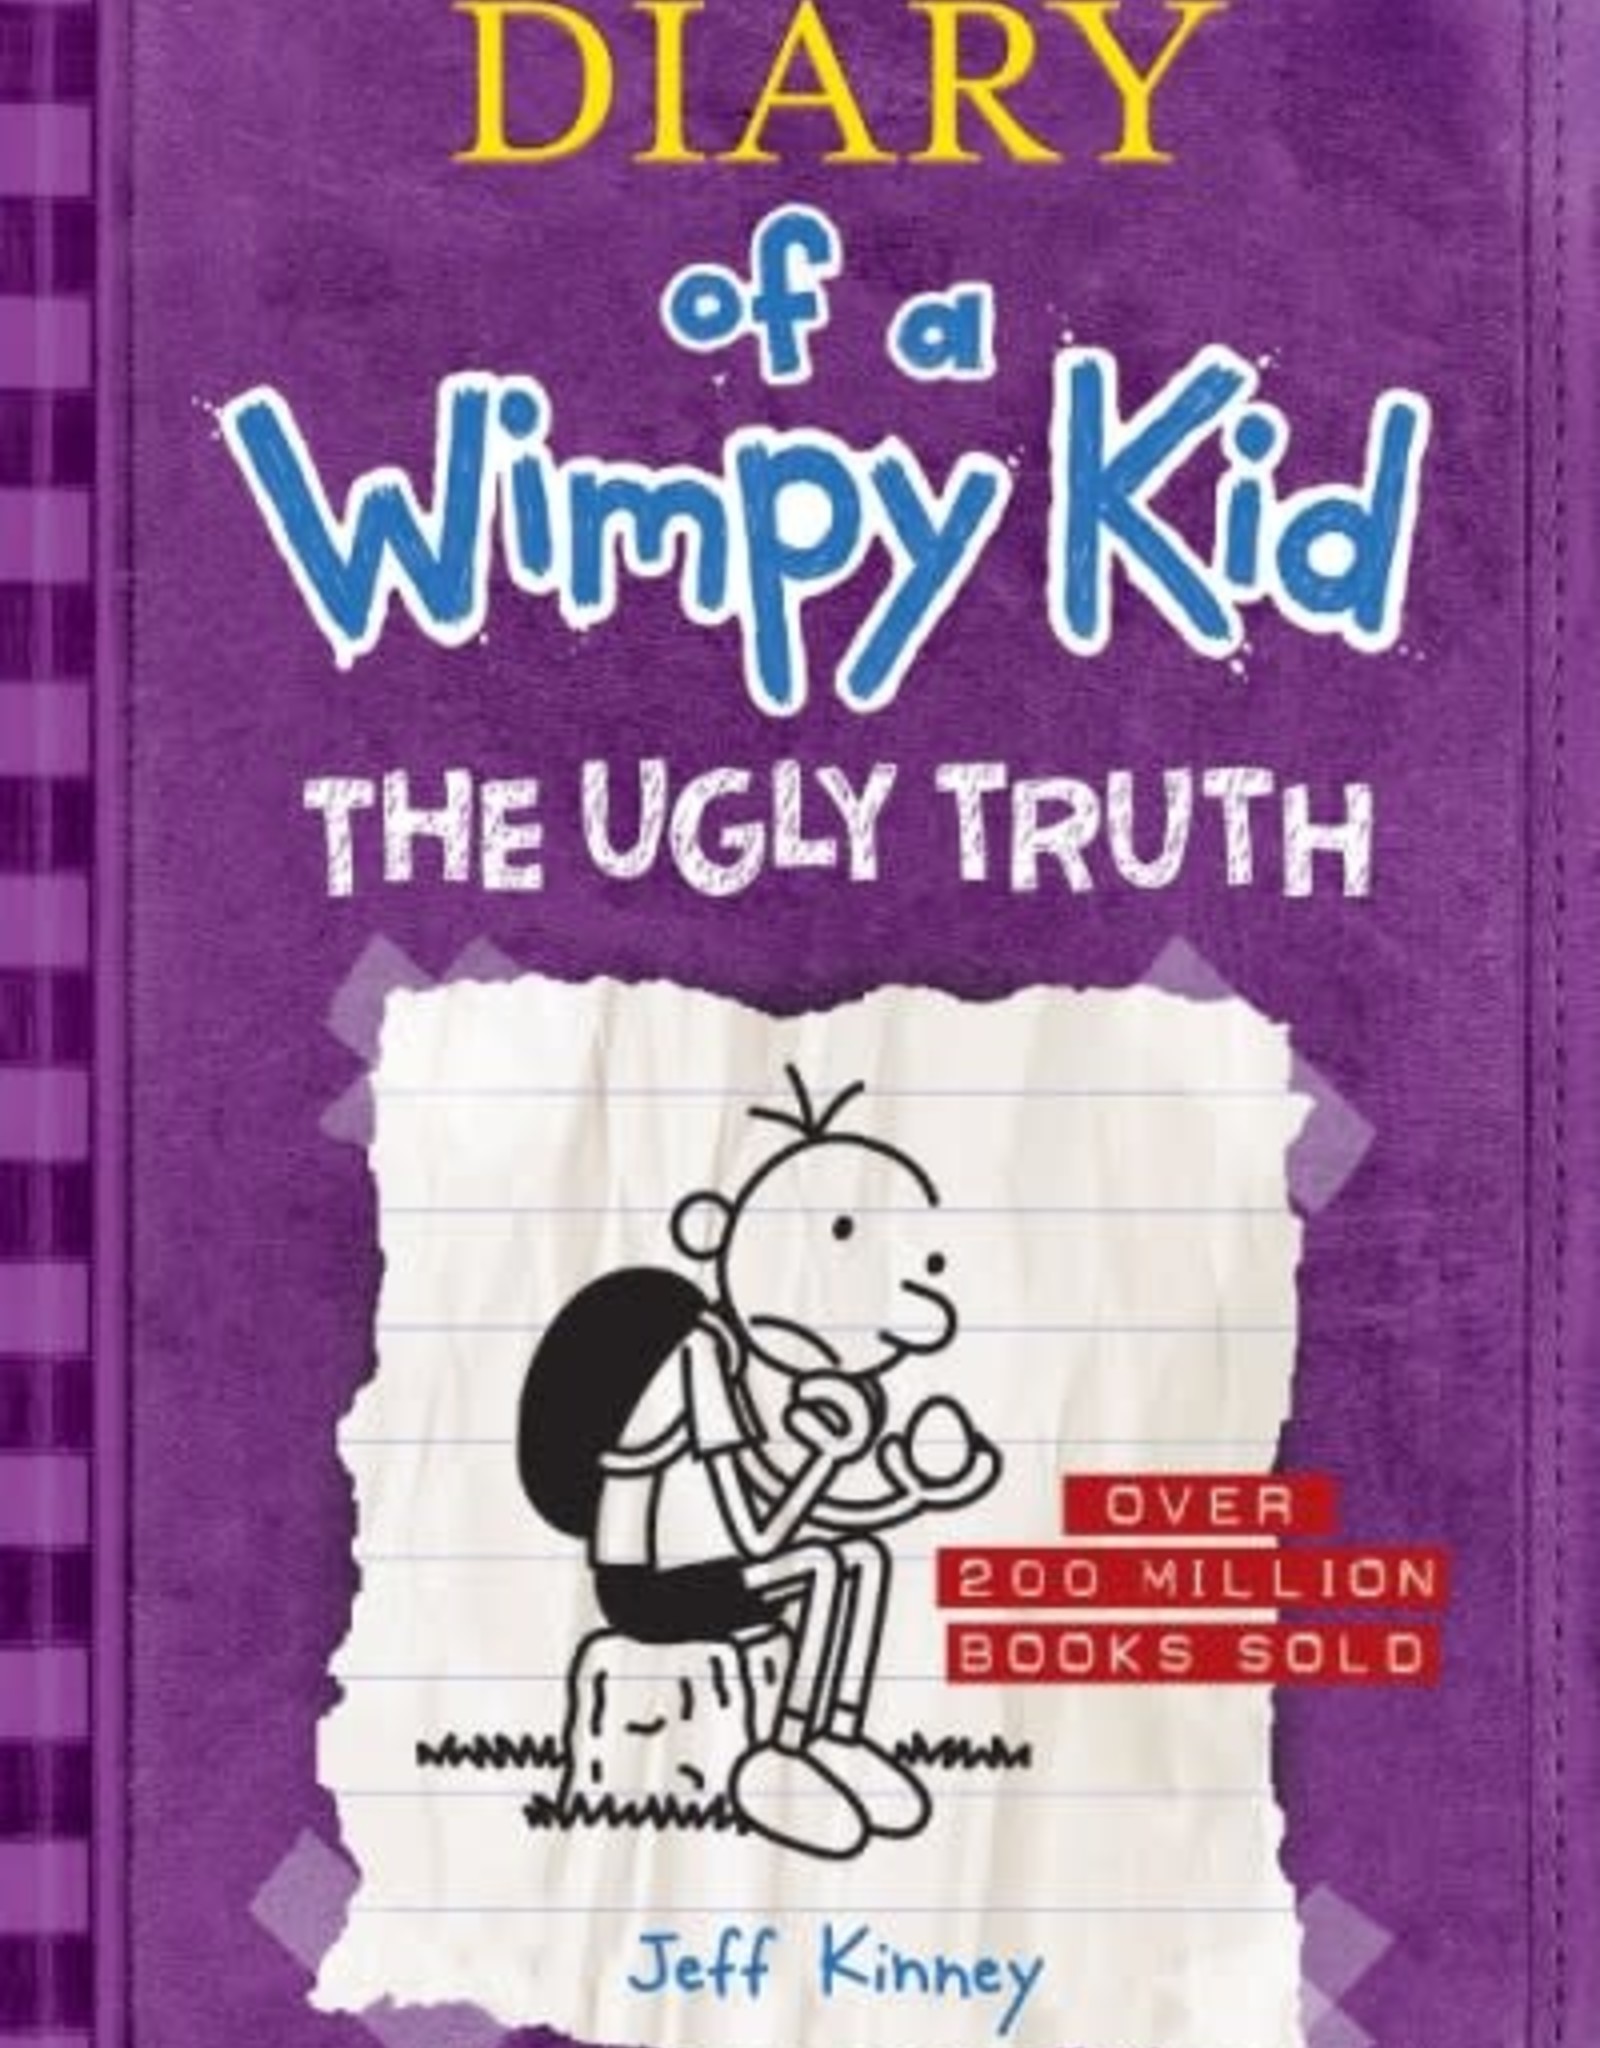 Diary Of A Wimpy Kid #5